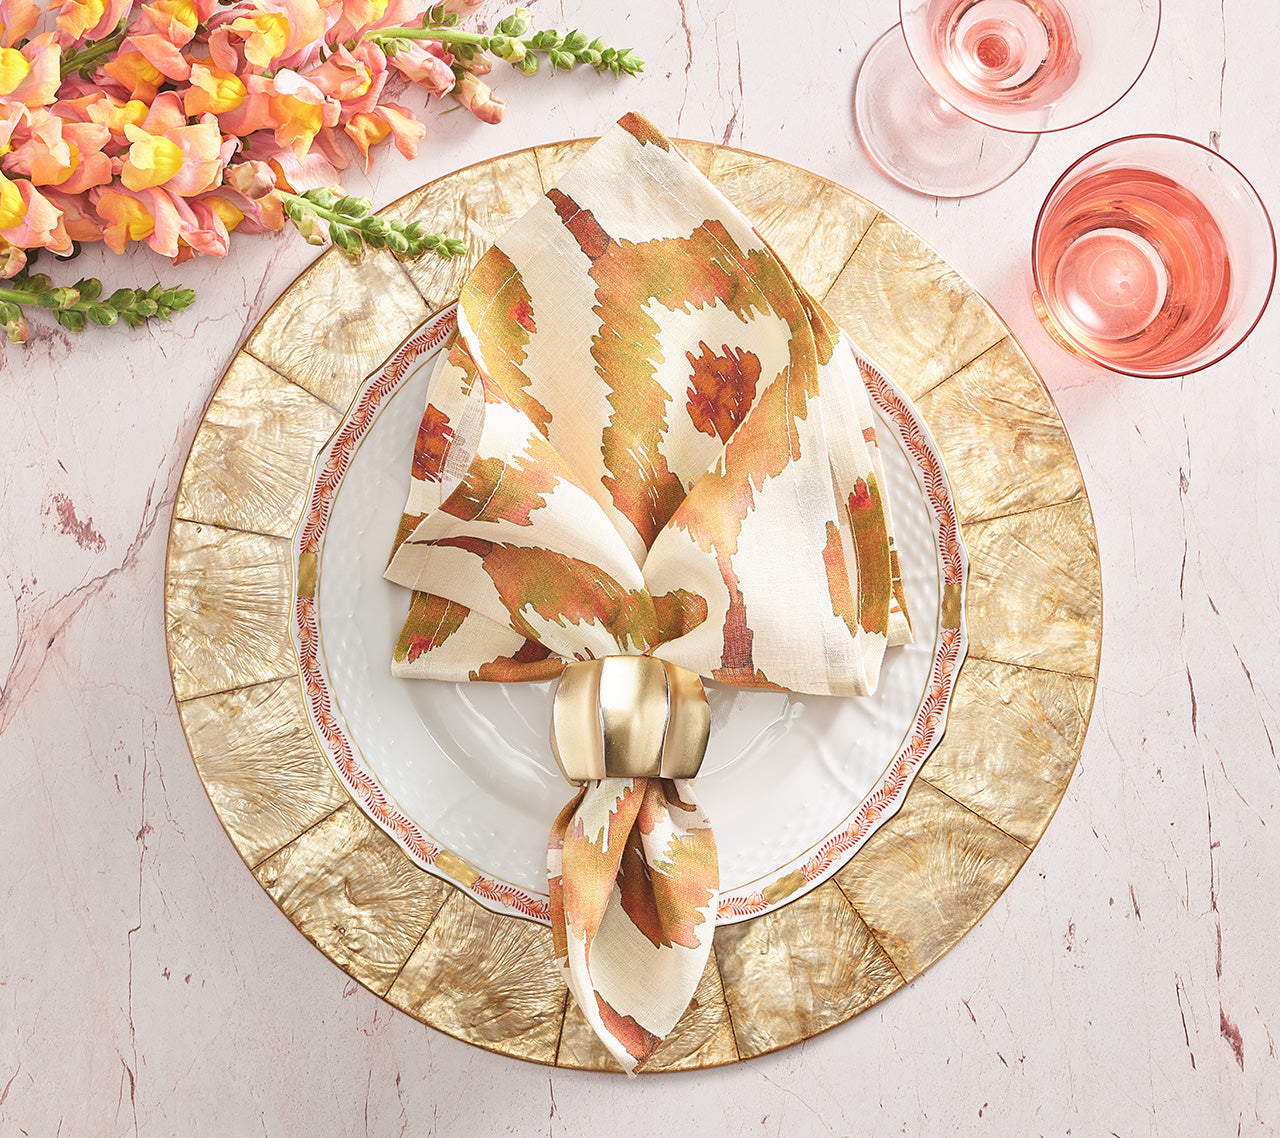 Round Capiz Placemat in Champagne, Set of 4